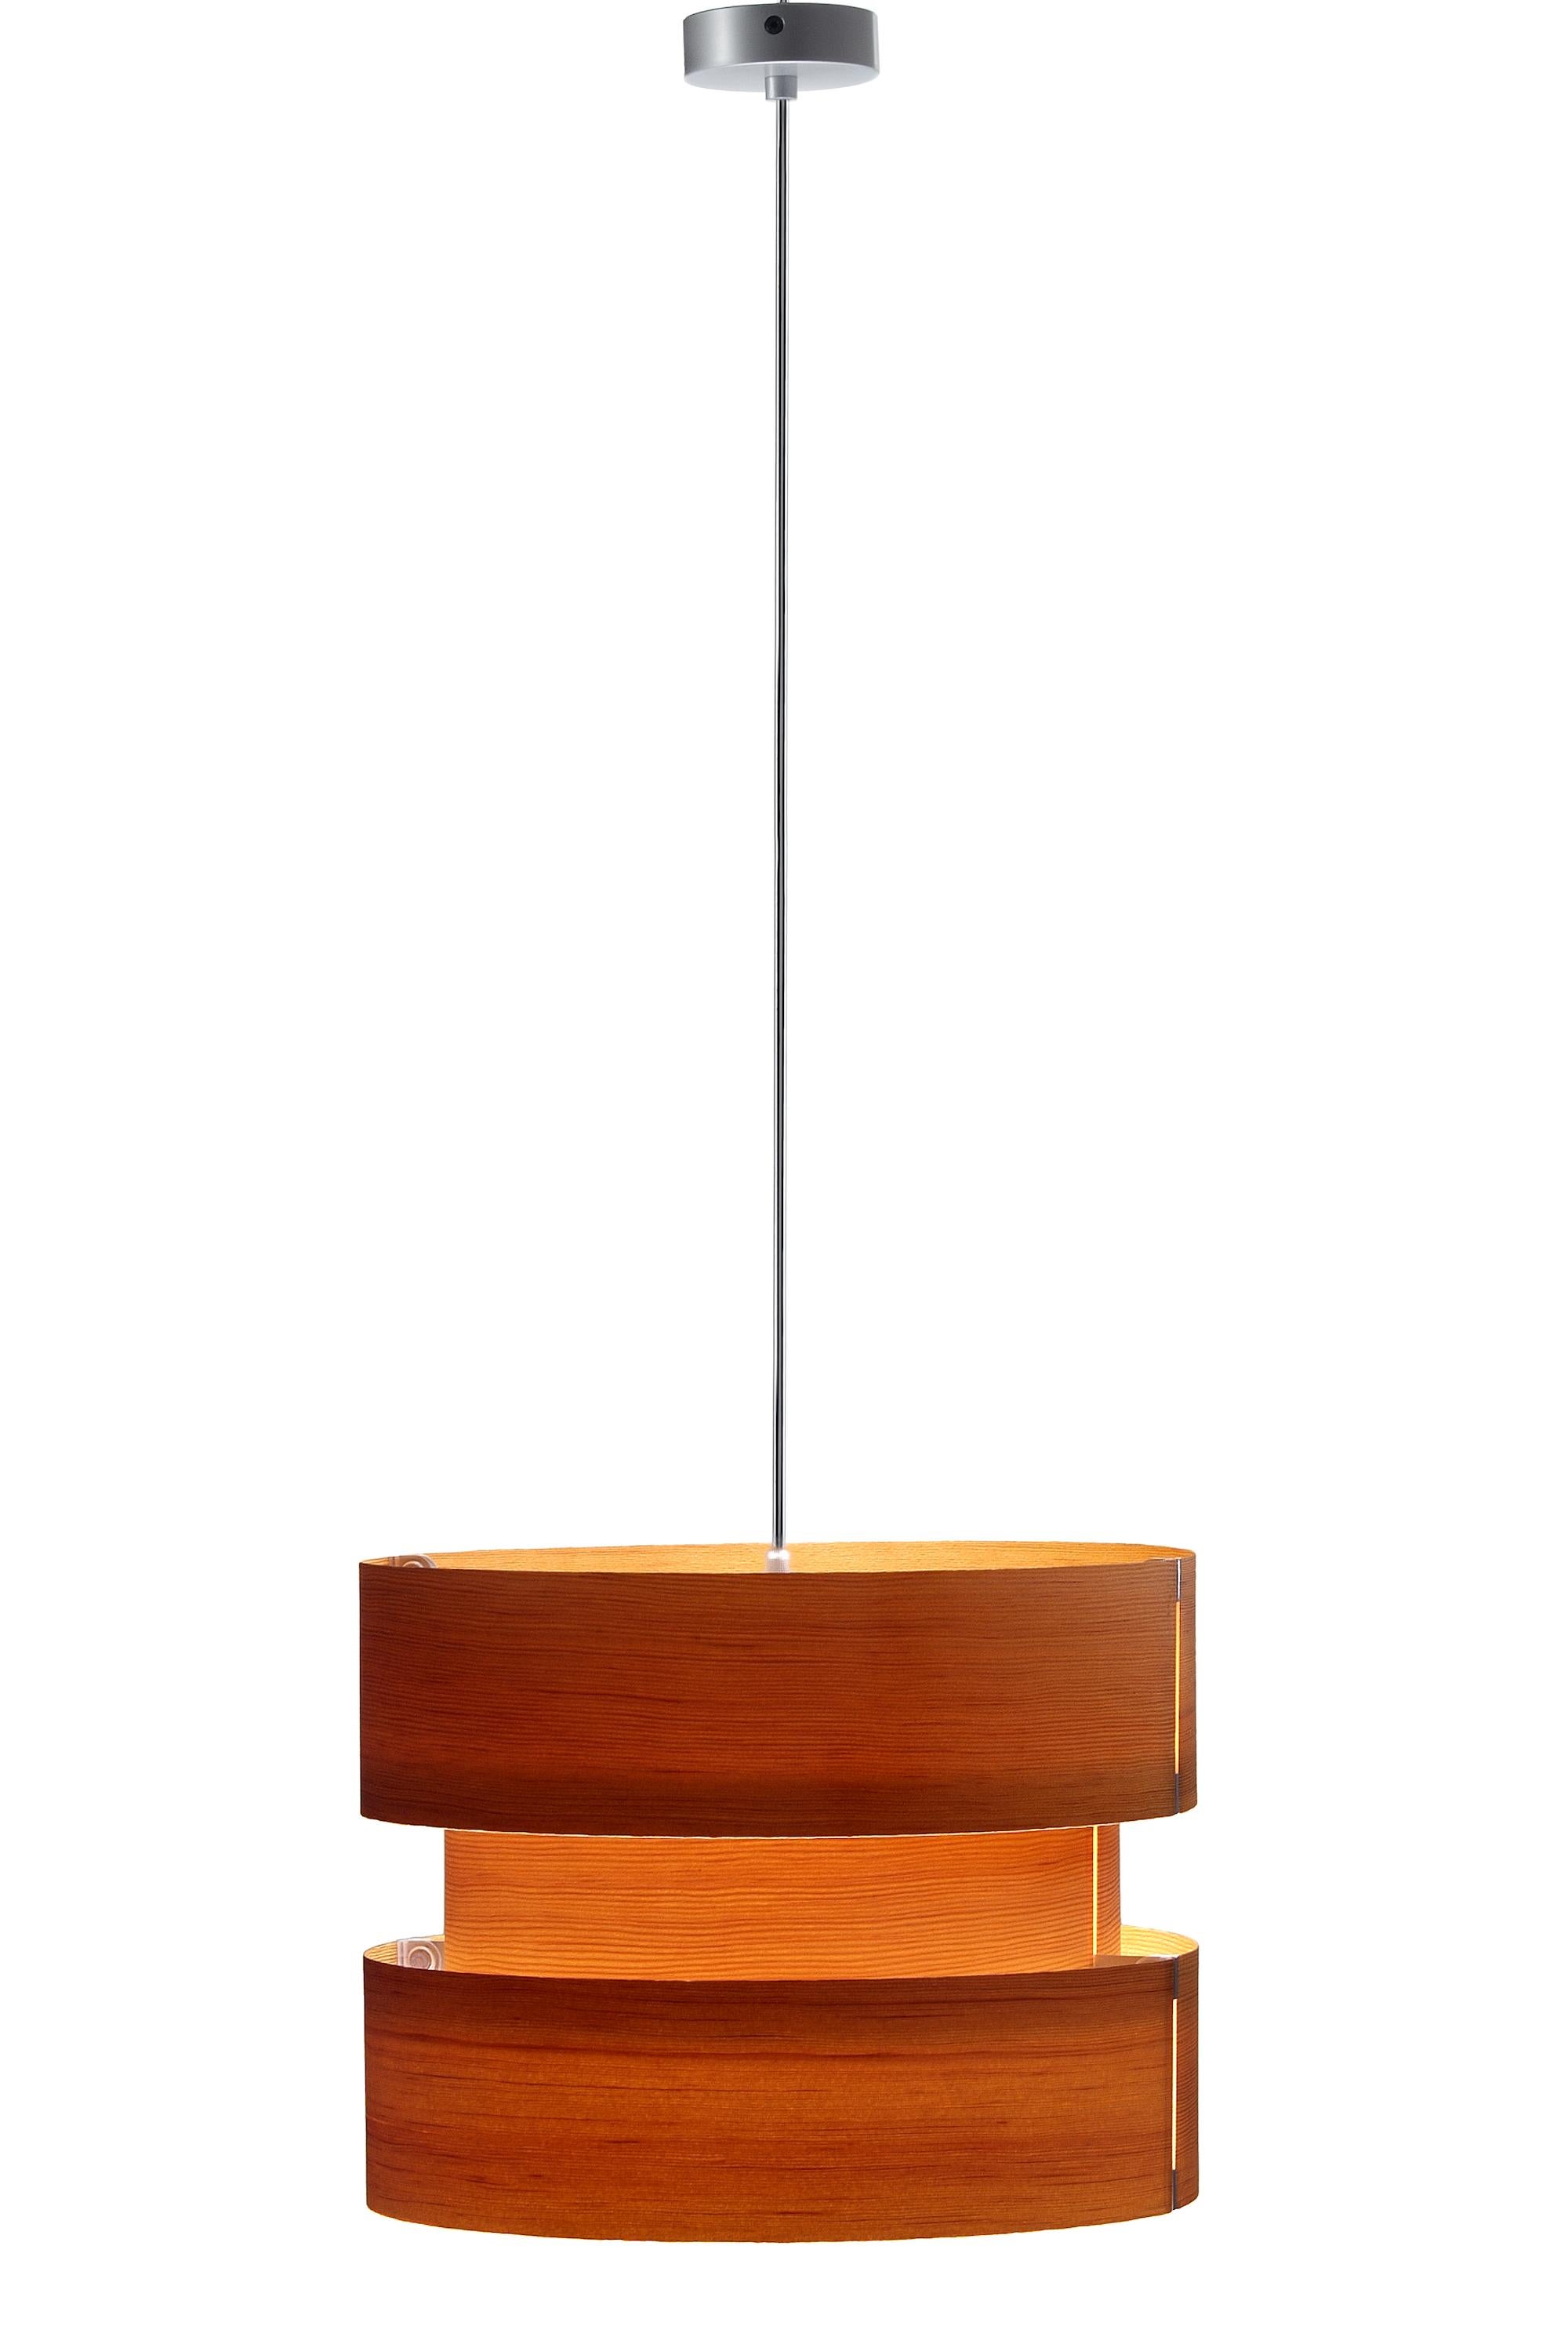 Large J.A. Coderch 'Columna Cister' Wood Suspension Lamp for Tunds For Sale 8